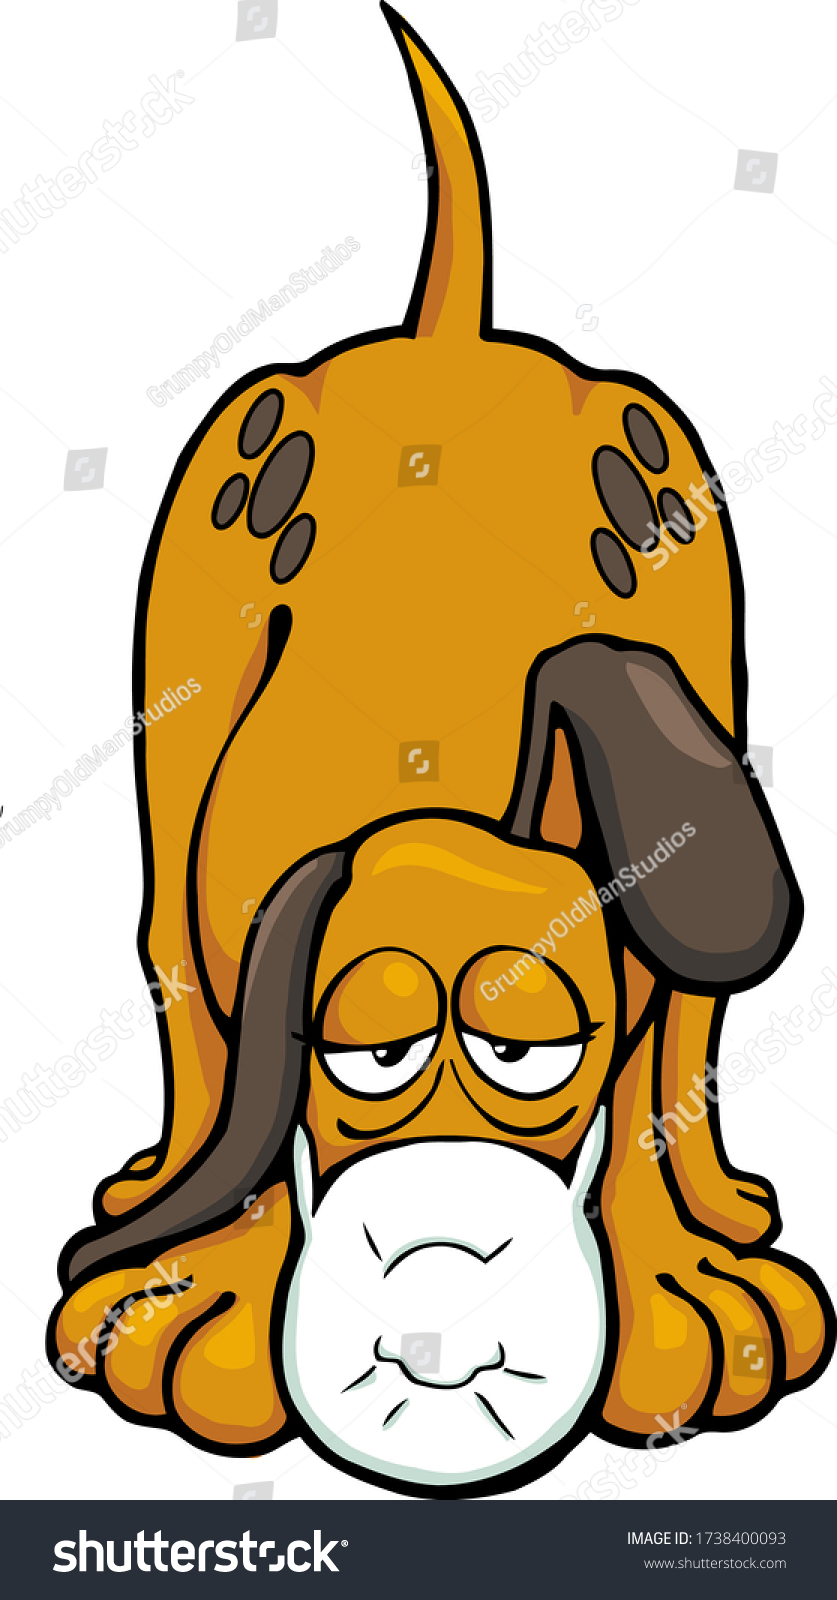 SVG of This dog is on the trail but has taken precautions to avoid sickness. This illustration features a dog sniffing with his know to the ground wearing a face mask. 
 svg